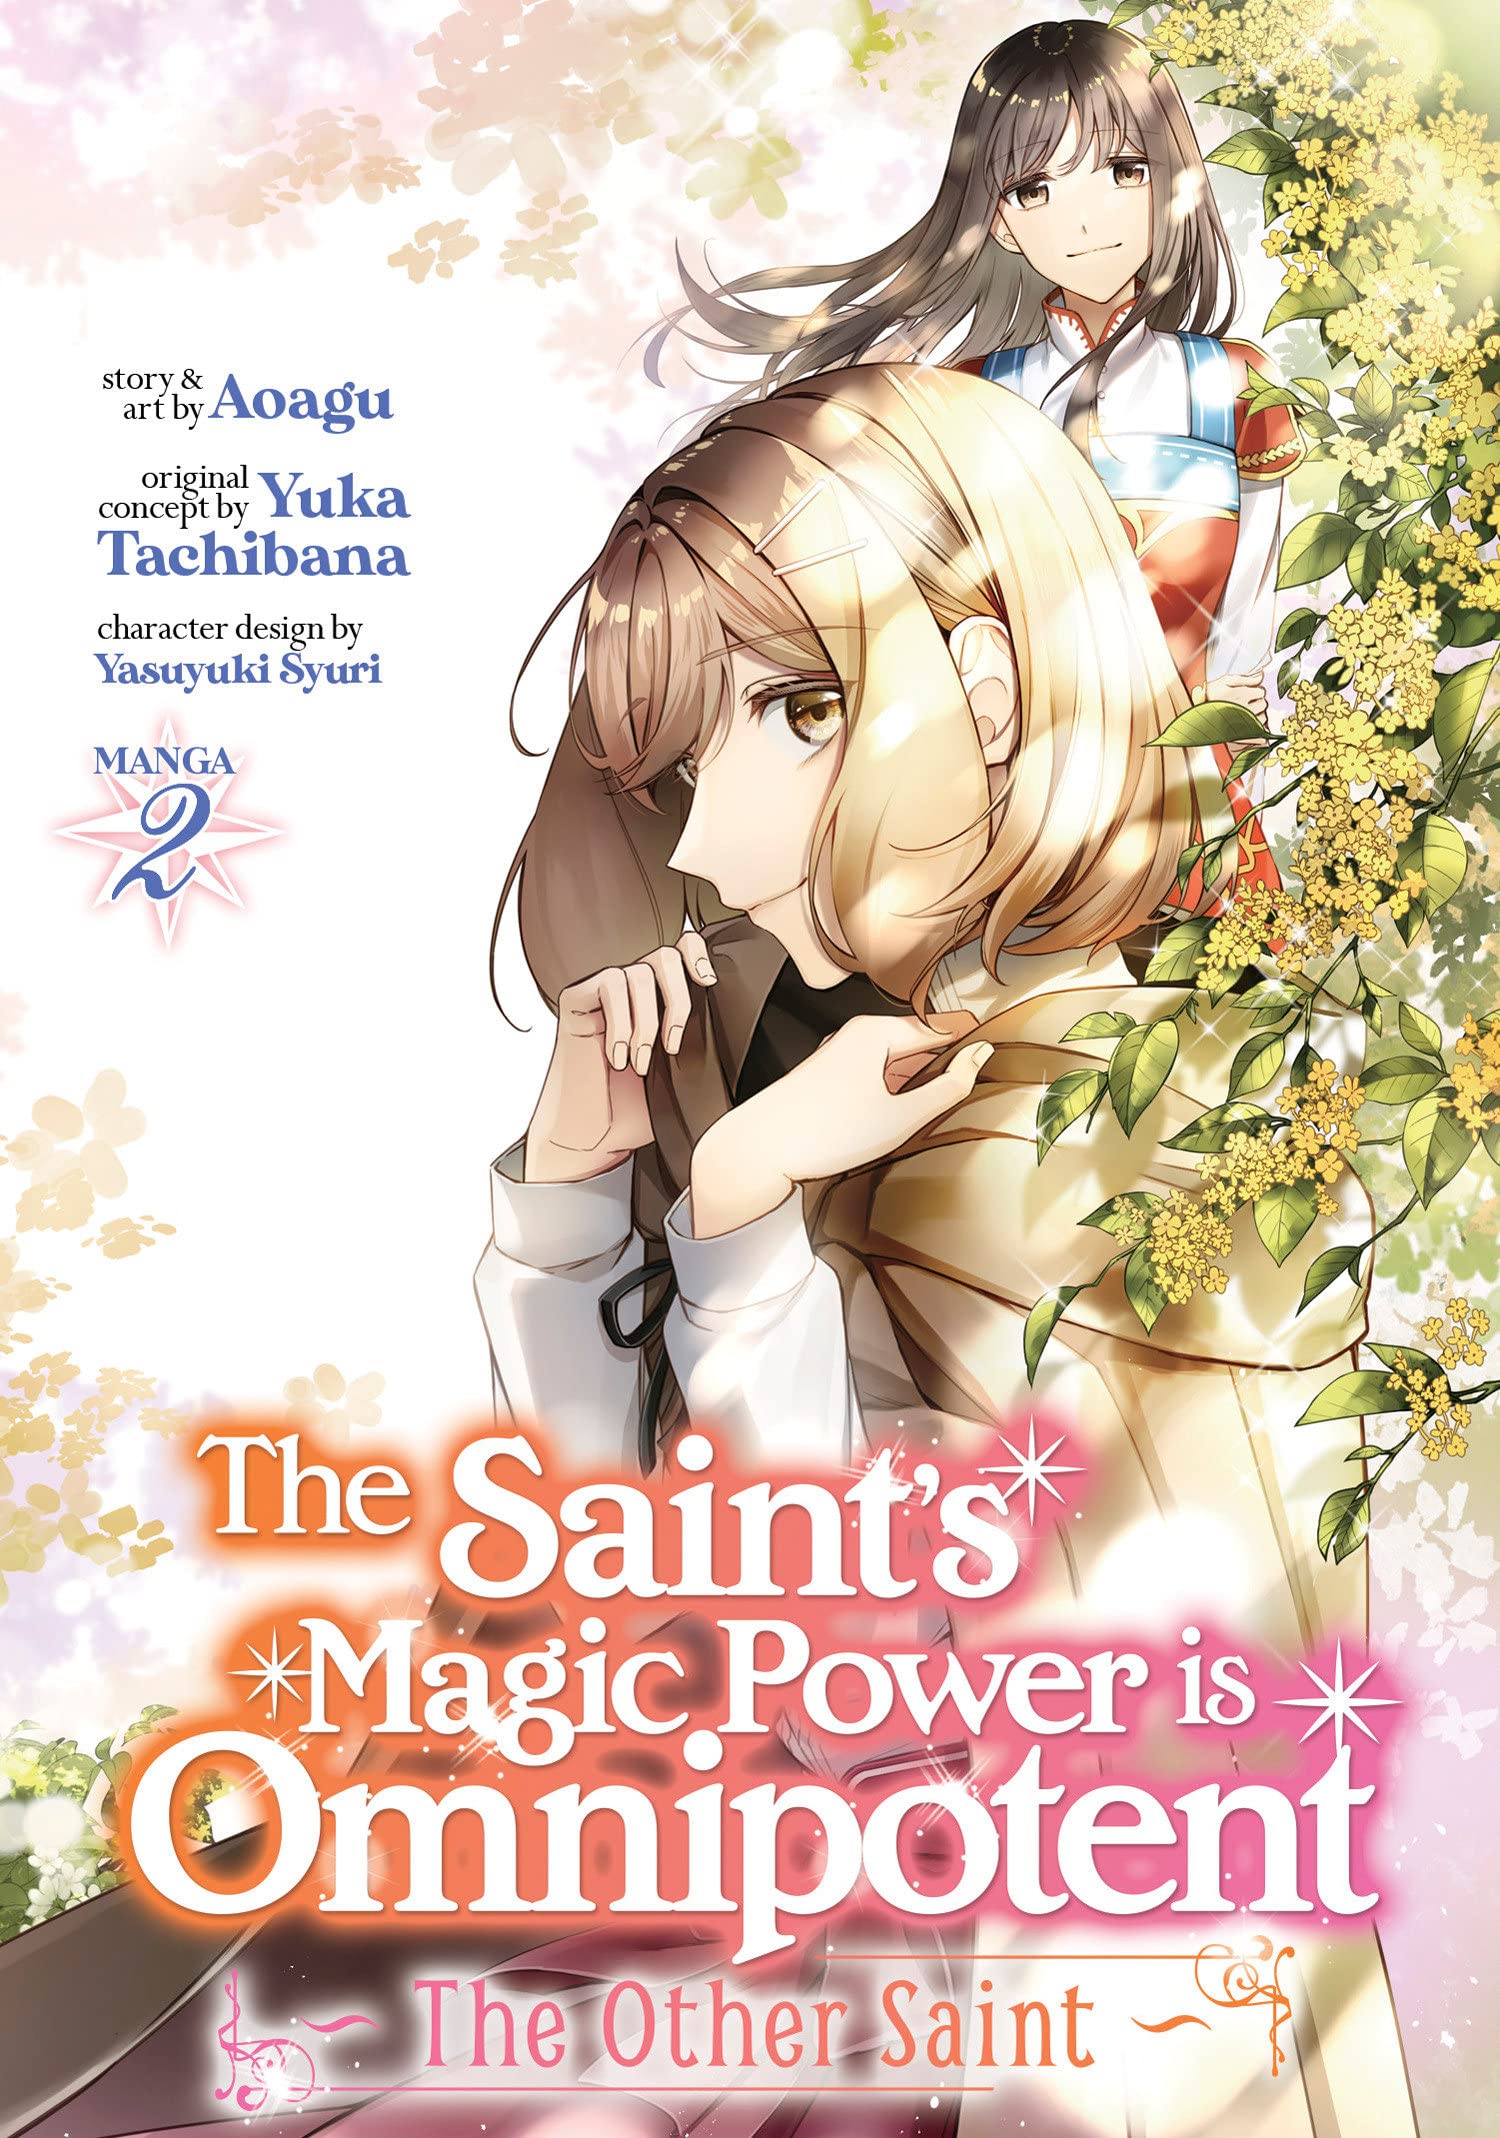 The Saint's Magic Power Is Omnipotent: The Other Saint (Manga) Vol. 02